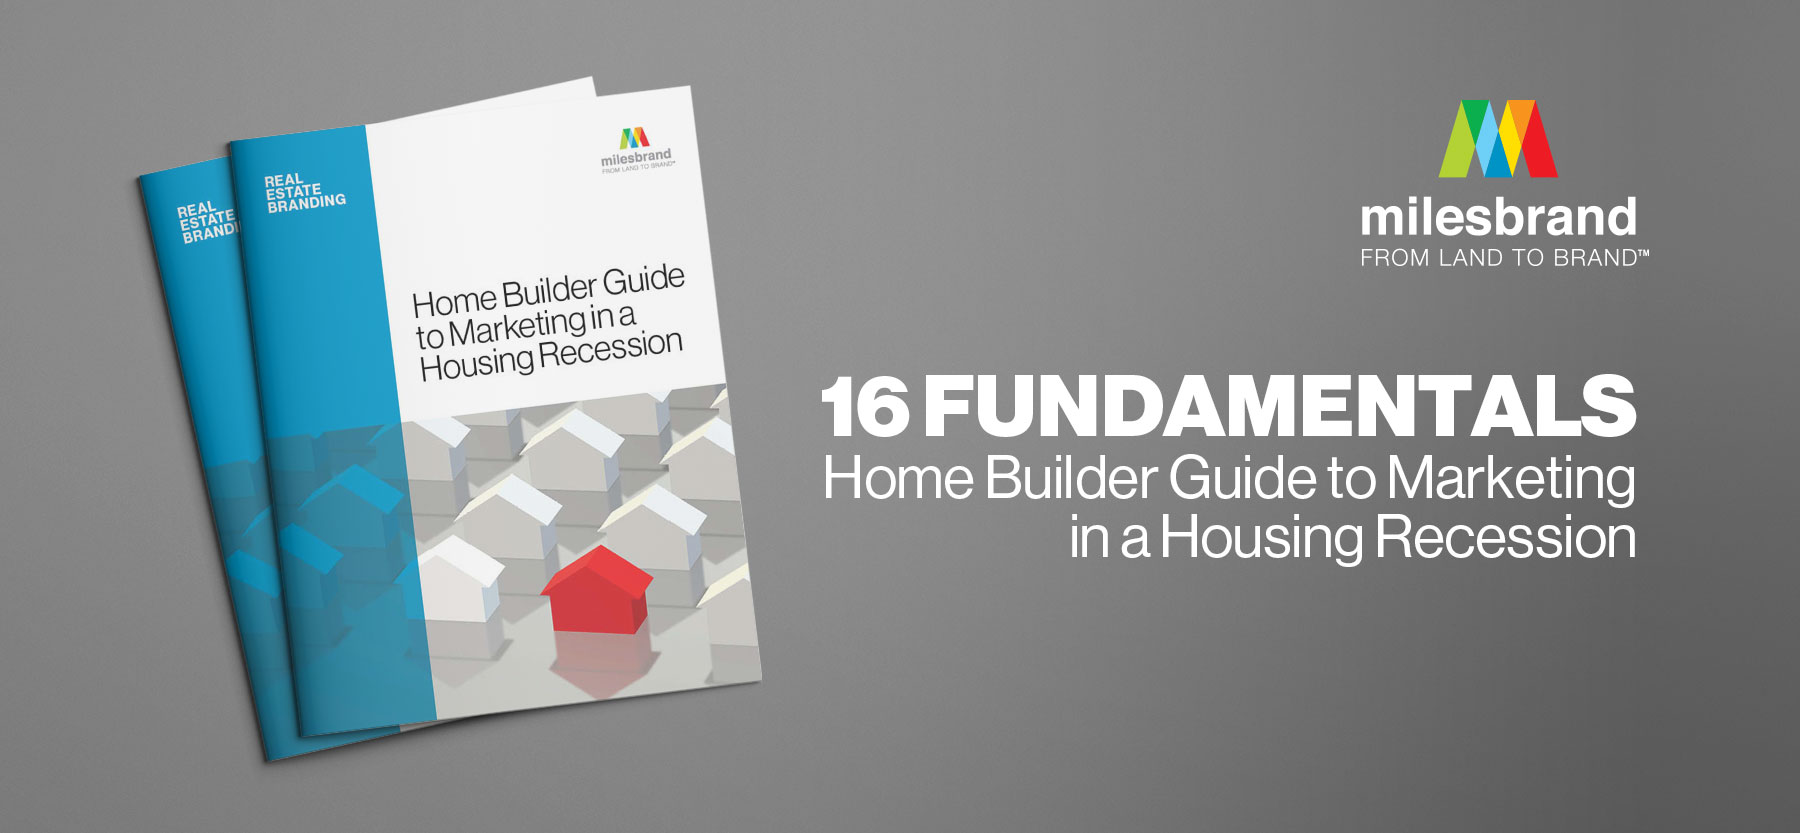 Home Builder Guide to Marketing in a Housing Recession